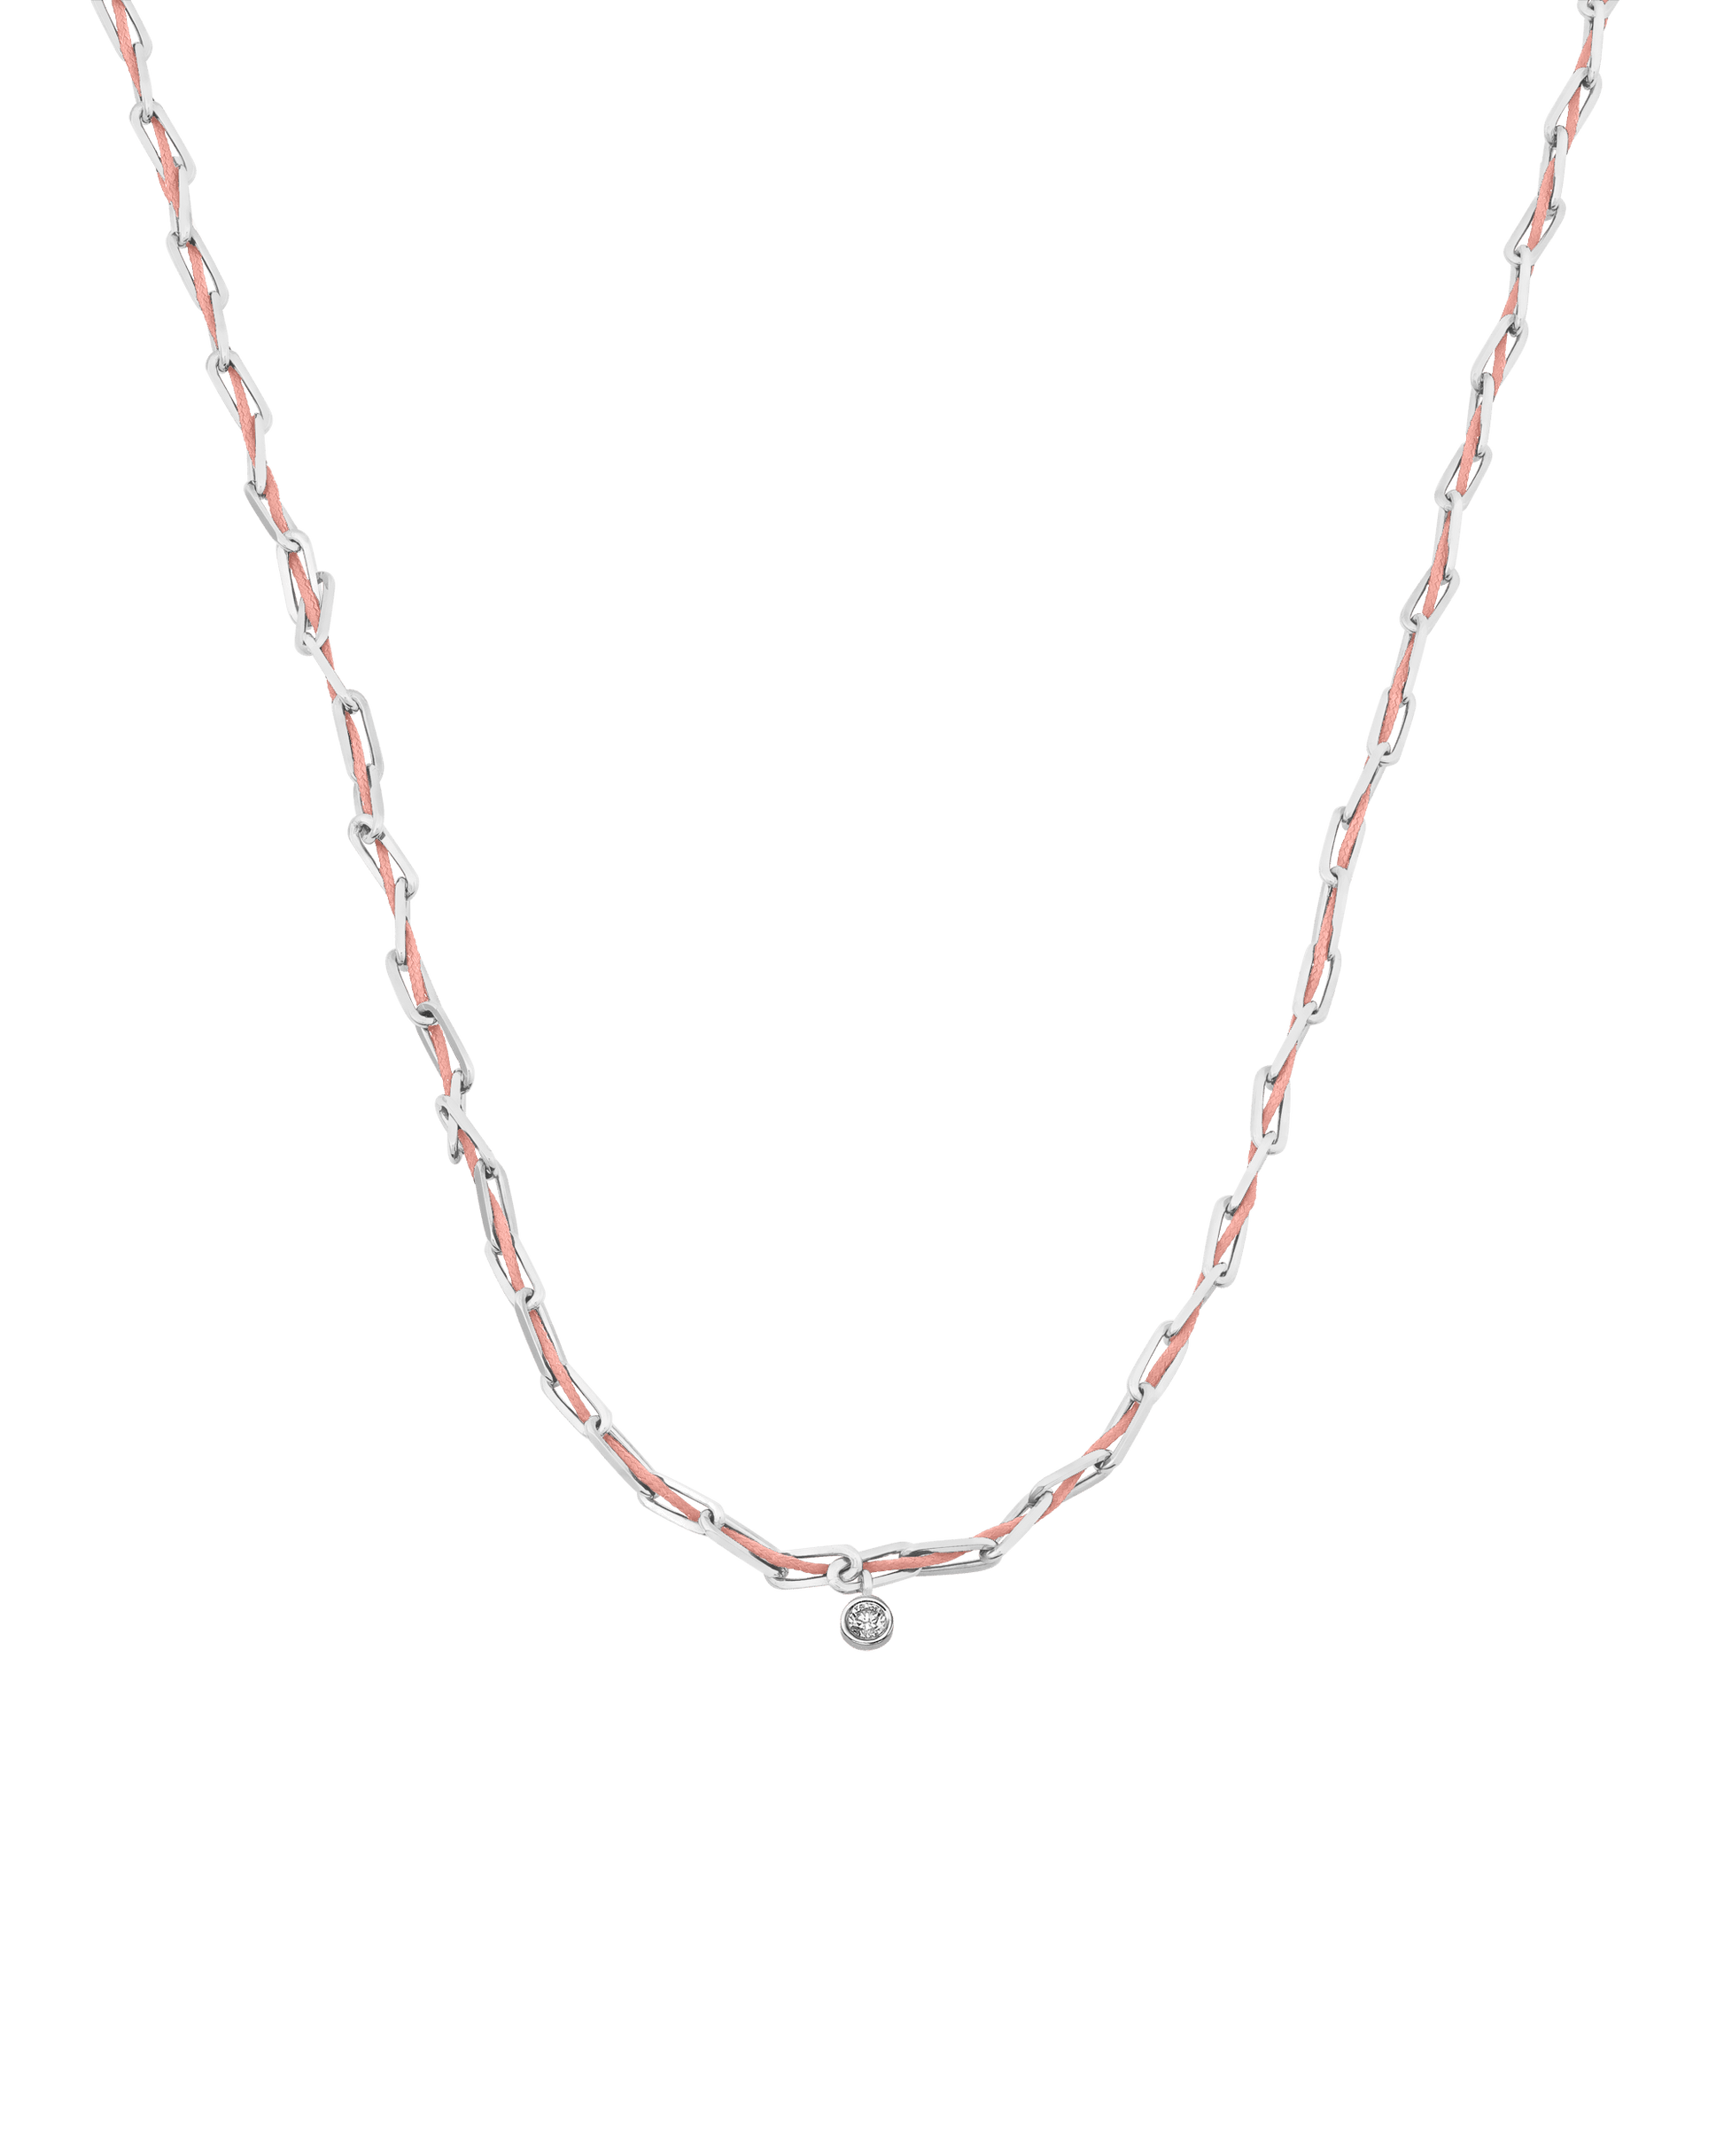 Twine Diamond Necklace - 925 Sterling Silver Necklaces magal-dev Pink Large: 0.10ct 16"